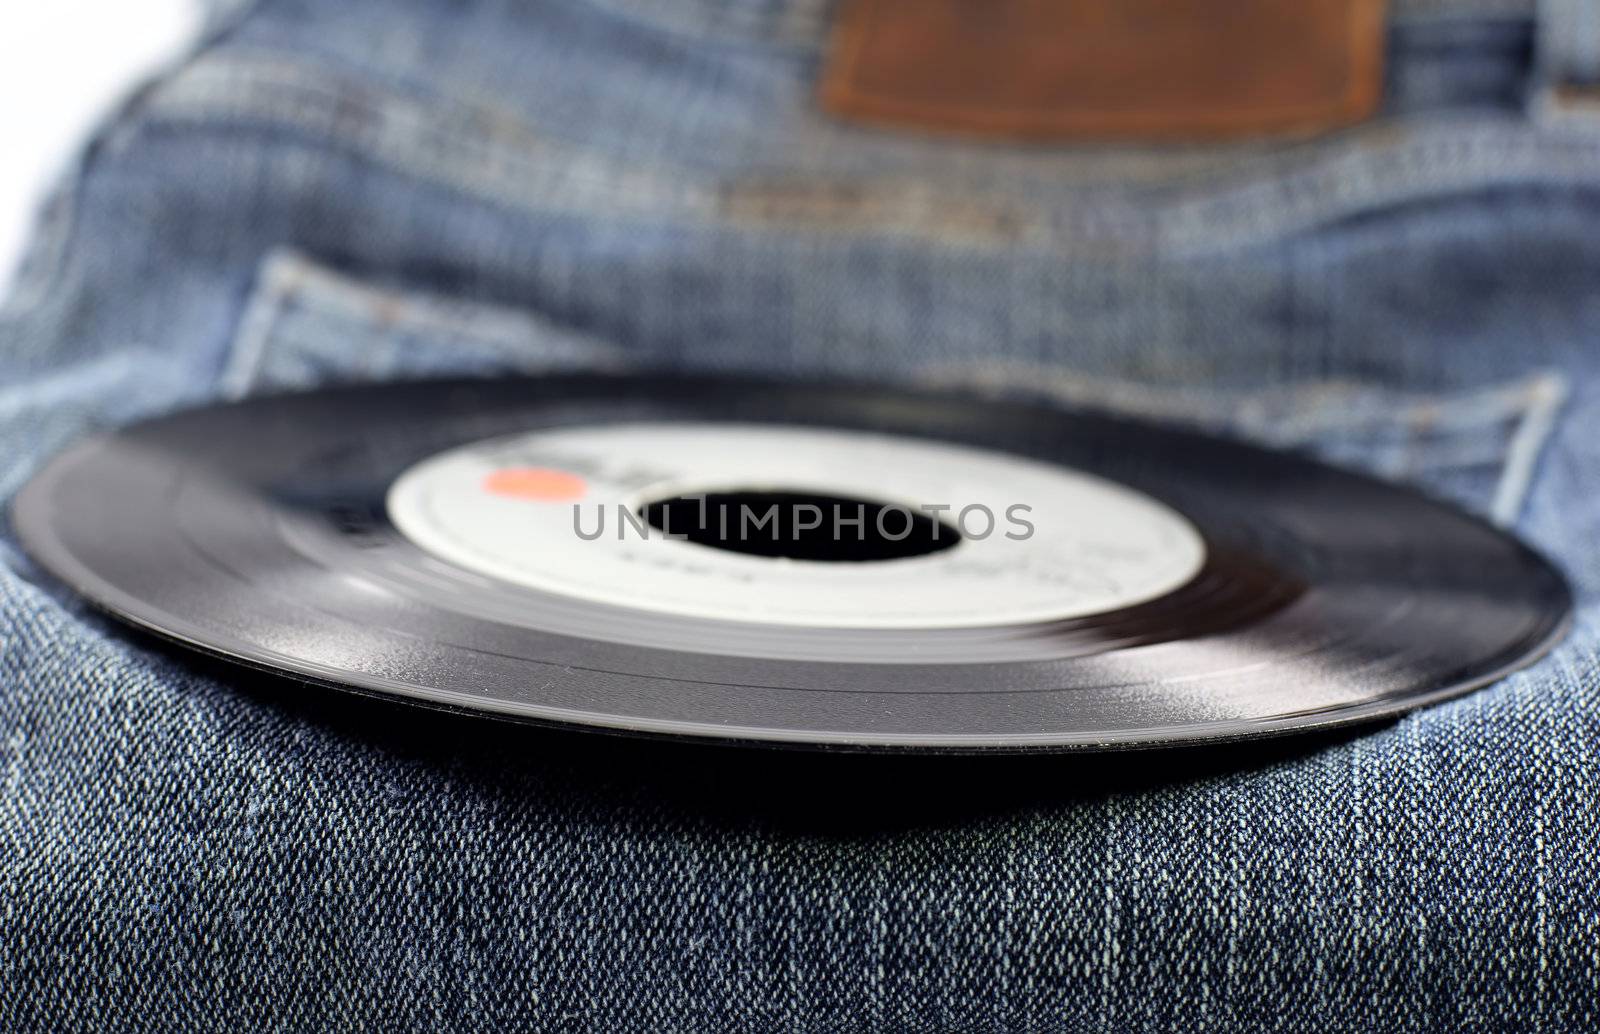 a vinyl record on a pair of jeans